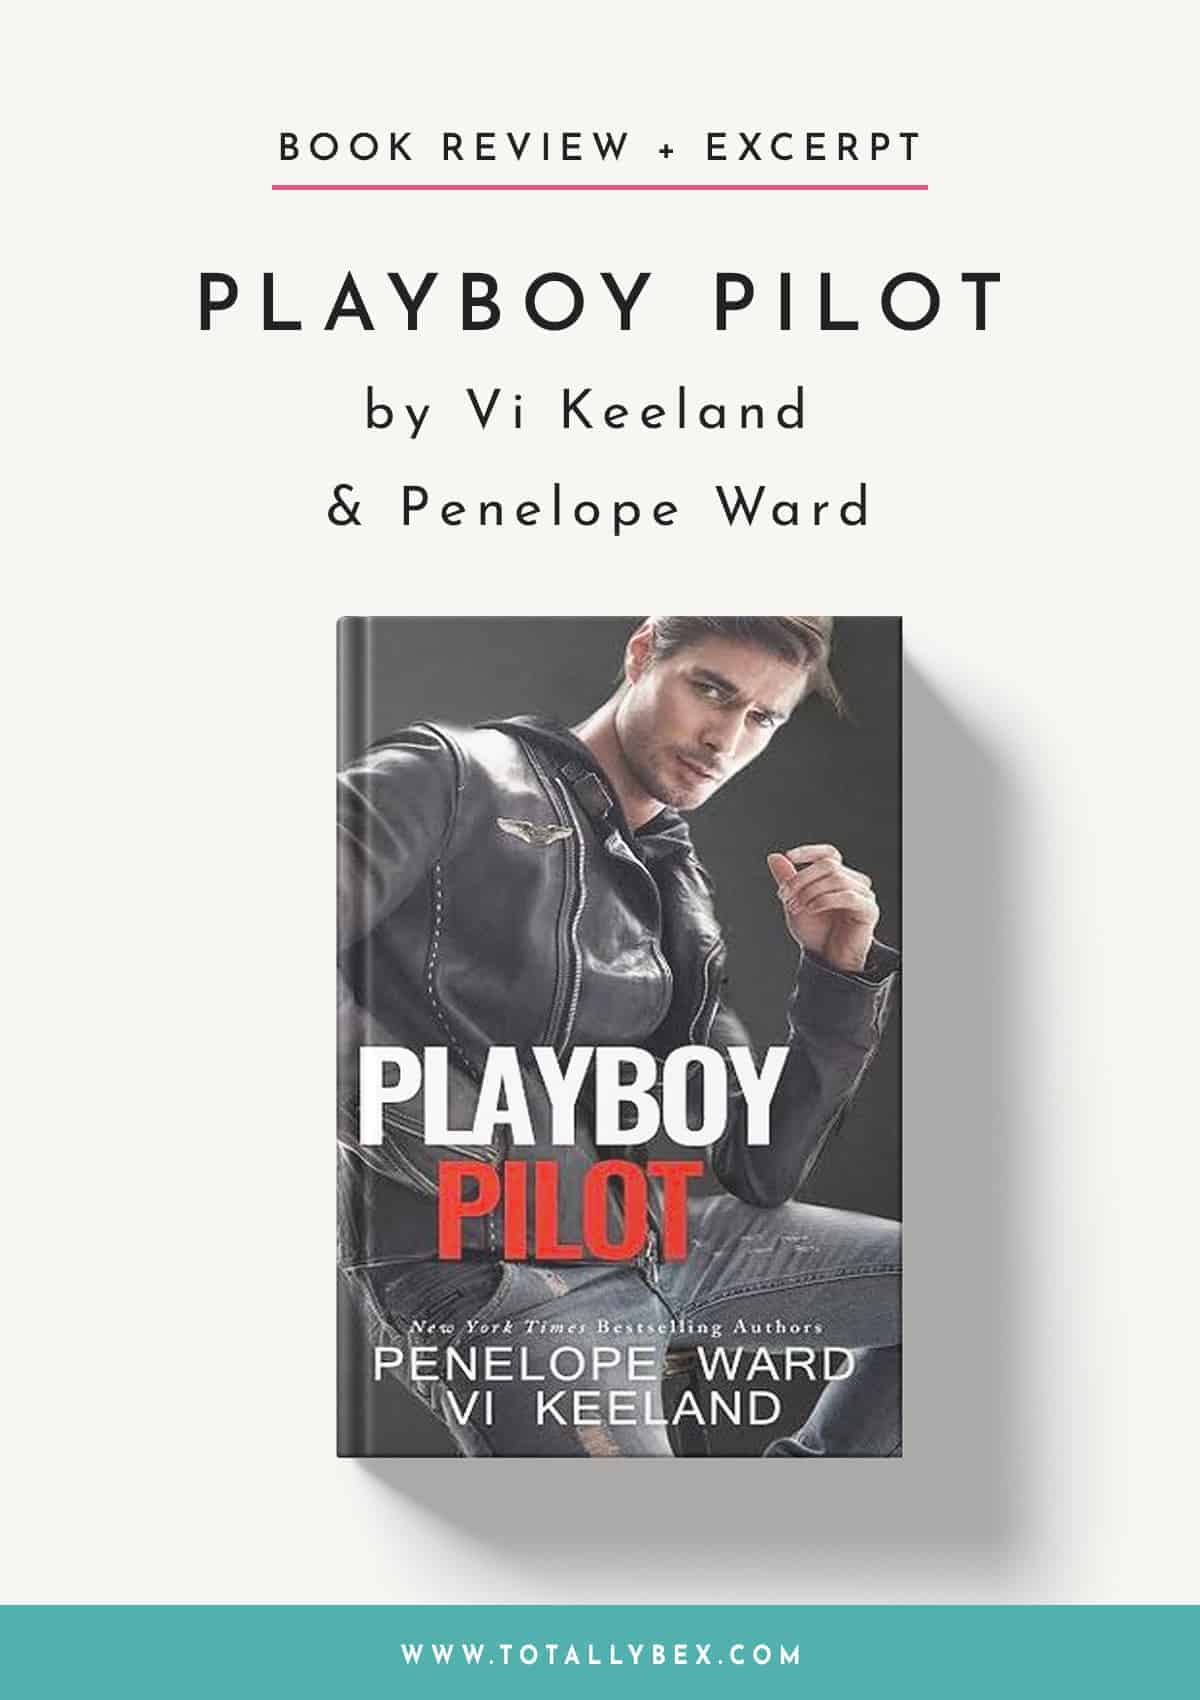 Playboy Pilot by Vi Keeland and Penelope Ward-BookReview+Excerpt